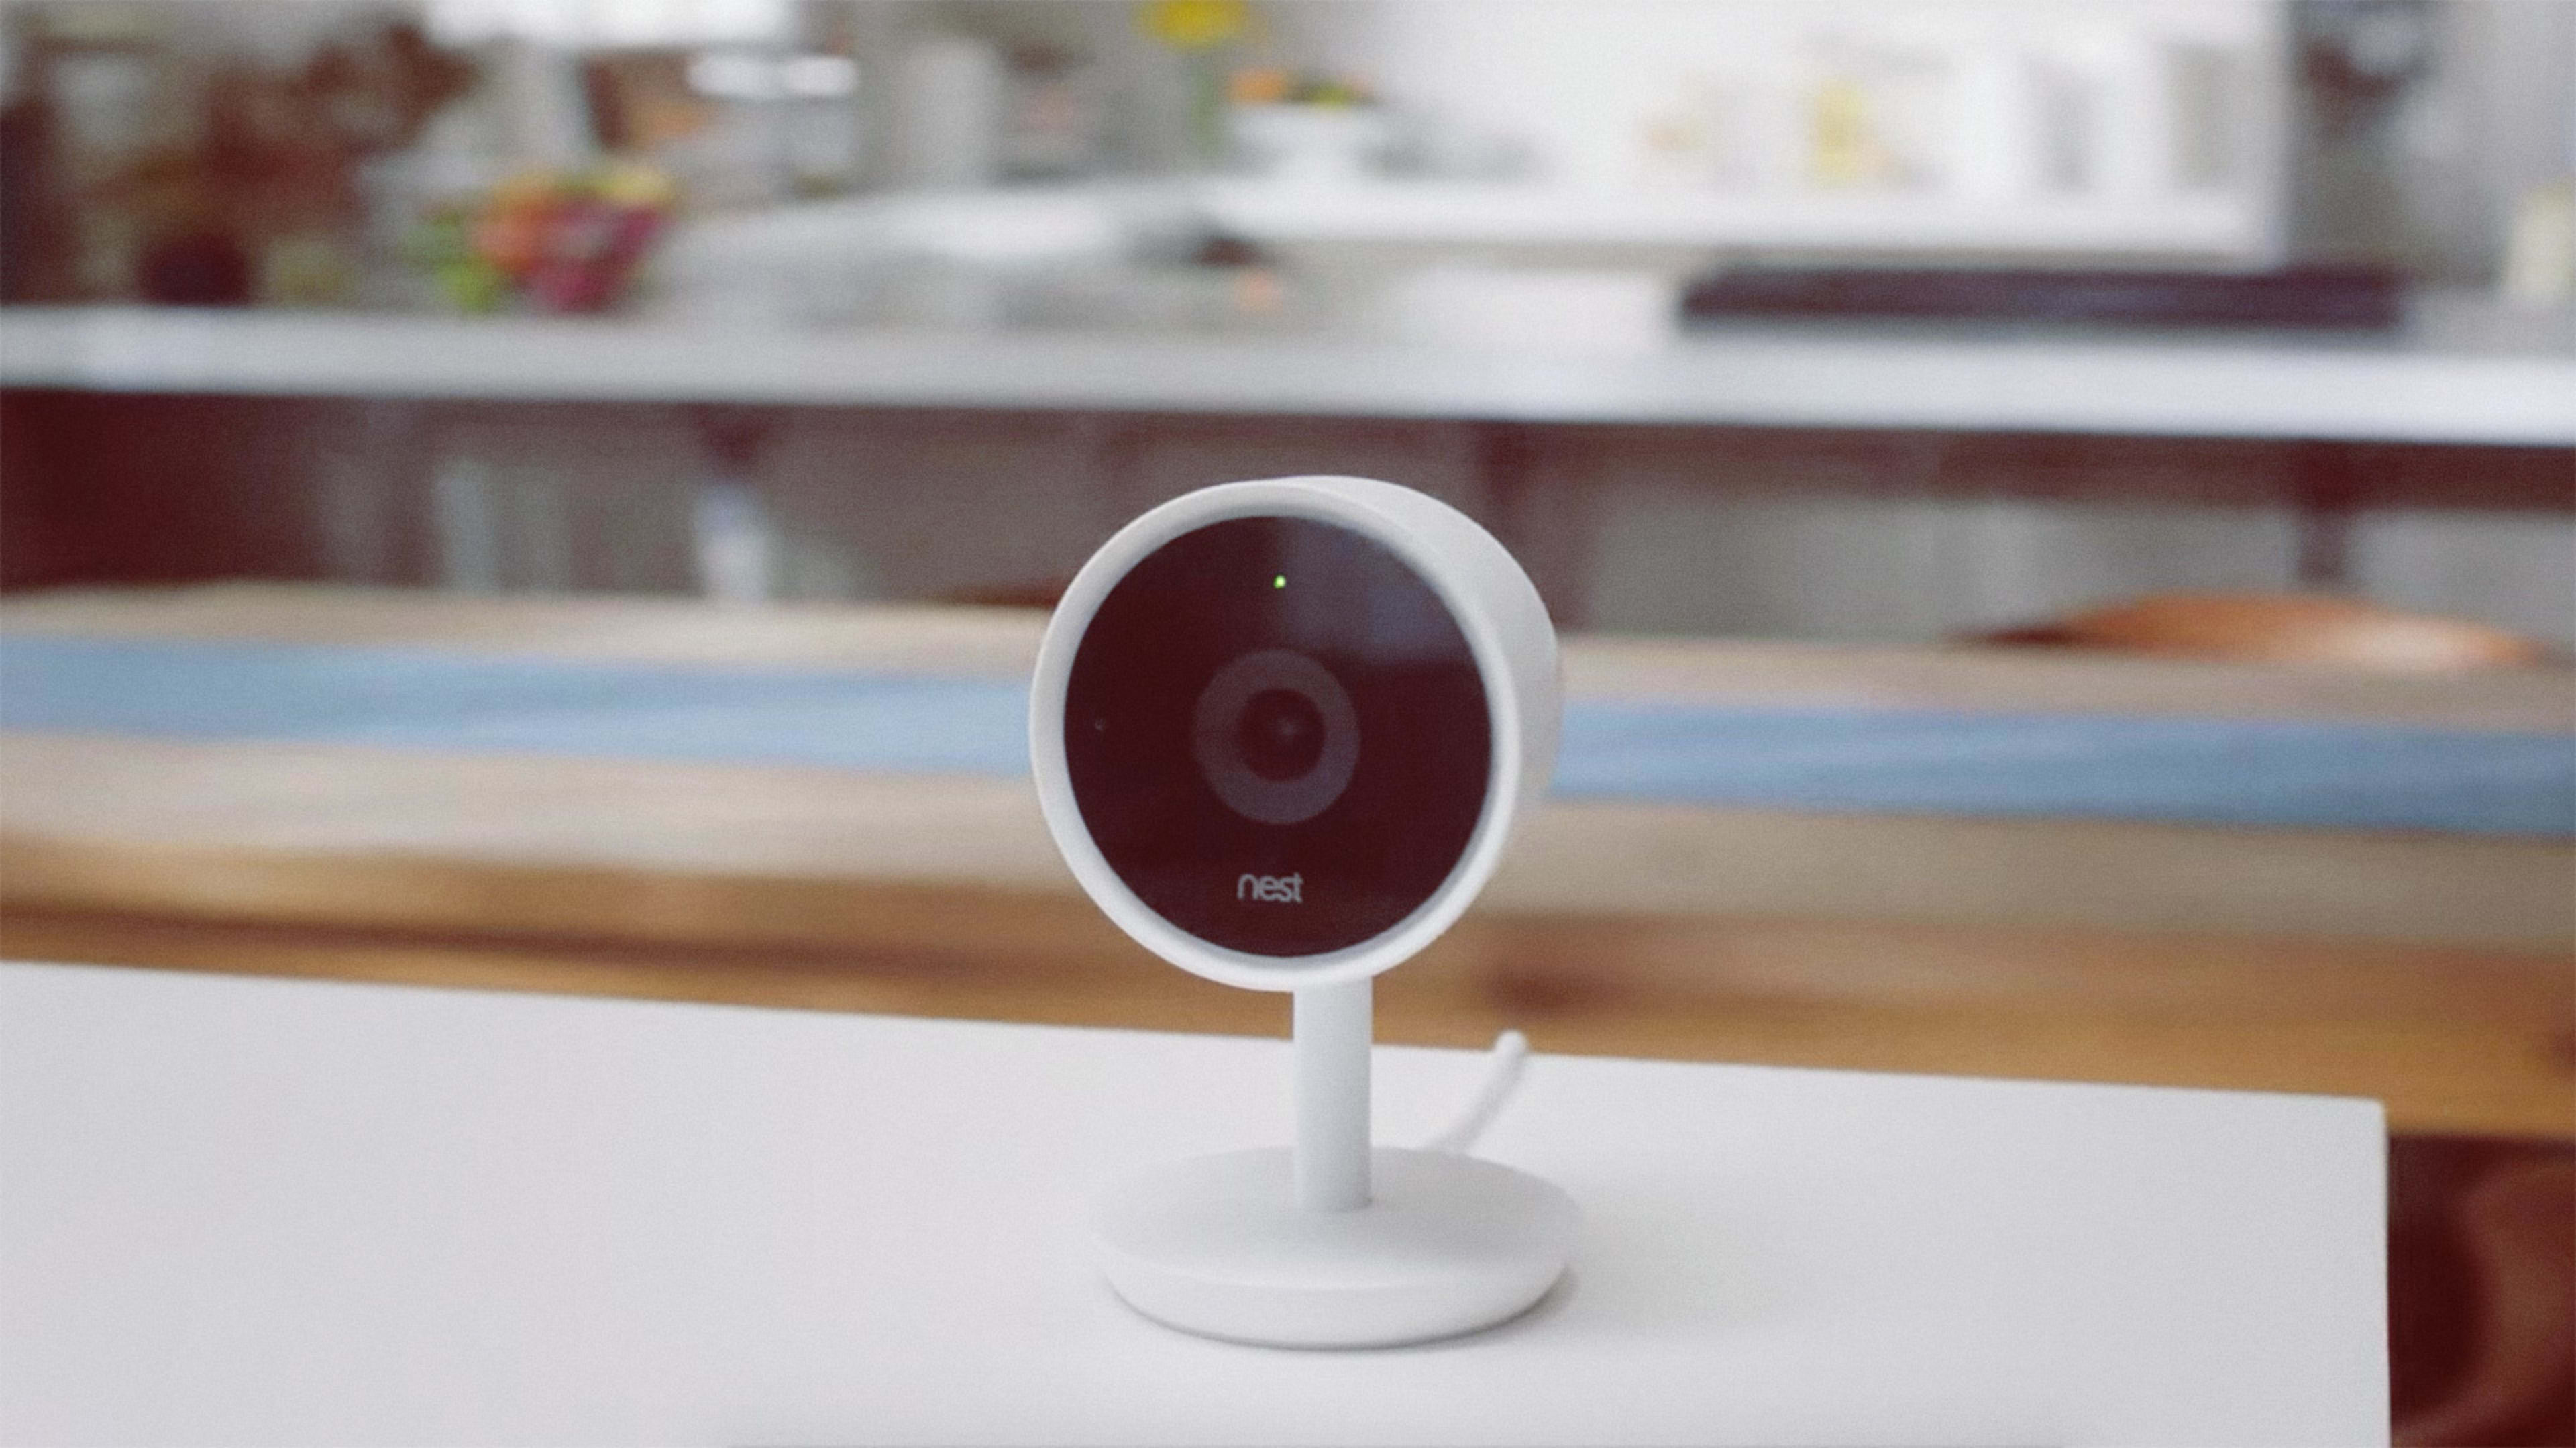 Here’s What Nest Has Been Working On: A Slicker, Smarter Security Camera